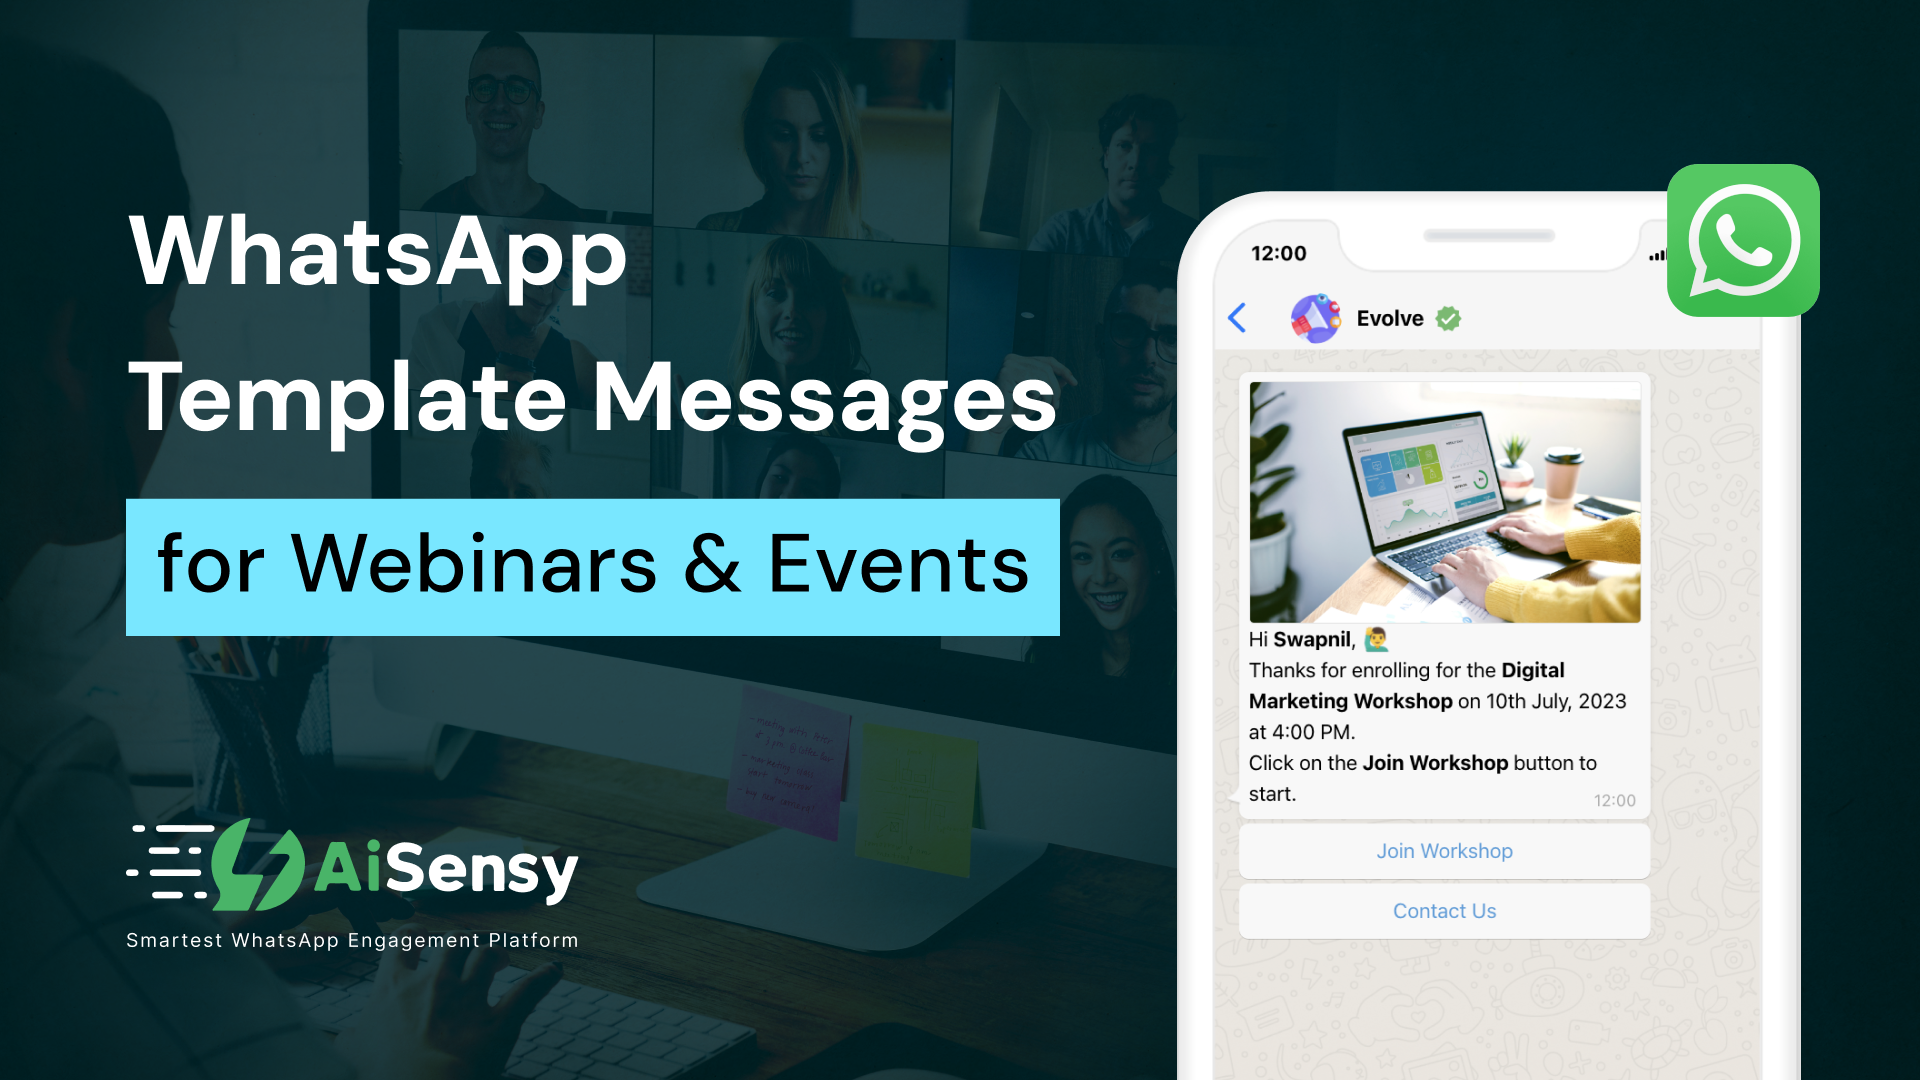 WhatsApp Template Messages for Webinars & Events